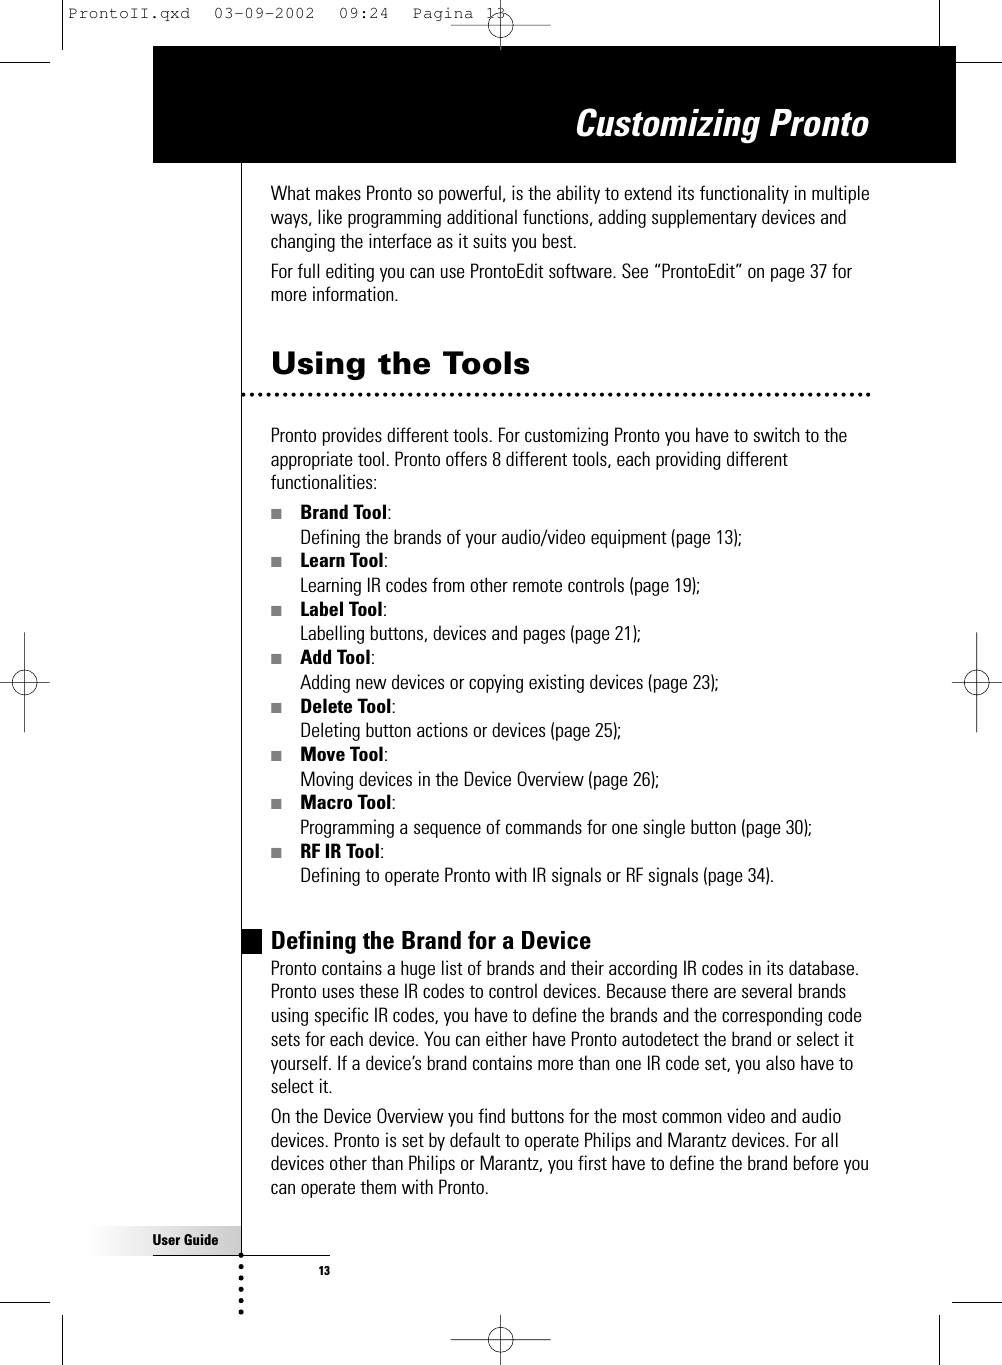 User Guide13Customizing ProntoWhat makes Pronto so powerful, is the ability to extend its functionality in multipleways, like programming additional functions, adding supplementary devices andchanging the interface as it suits you best.For full editing you can use ProntoEdit software. See “ProntoEdit” on page 37 formore information.Using the ToolsPronto provides different tools. For customizing Pronto you have to switch to theappropriate tool. Pronto offers 8 different tools, each providing differentfunctionalities:■Brand Tool:Defining the brands of your audio/video equipment (page 13);■Learn Tool:Learning IR codes from other remote controls (page 19);■Label Tool:Labelling buttons, devices and pages (page 21);■Add Tool:Adding new devices or copying existing devices (page 23);■Delete Tool:Deleting button actions or devices (page 25);■Move Tool:Moving devices in the Device Overview (page 26);■Macro Tool:Programming a sequence of commands for one single button (page 30);■RF IR Tool:Defining to operate Pronto with IR signals or RF signals (page 34).Defining the Brand for a DevicePronto contains a huge list of brands and their according IR codes in its database.Pronto uses these IR codes to control devices. Because there are several brandsusing specific IR codes, you have to define the brands and the corresponding codesets for each device. You can either have Pronto autodetect the brand or select ityourself. If a device’s brand contains more than one IR code set, you also have toselect it.On the Device Overview you find buttons for the most common video and audiodevices. Pronto is set by default to operate Philips and Marantz devices. For alldevices other than Philips or Marantz, you first have to define the brand before youcan operate them with Pronto.ProntoII.qxd  03-09-2002  09:24  Pagina 13